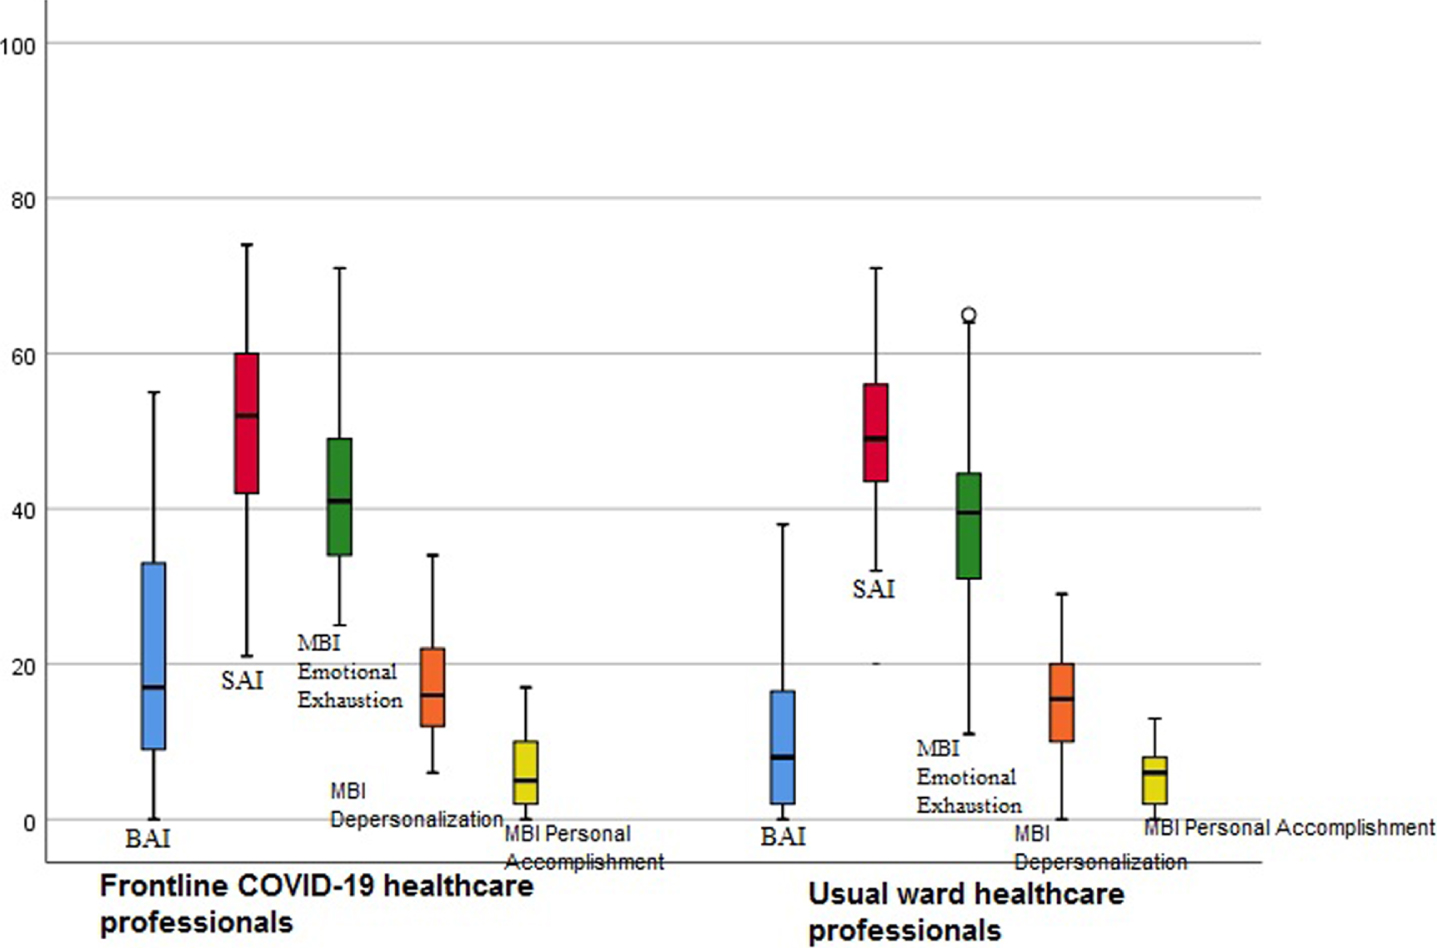 Burnout and anxiety level of frontline COVID-19 healthcare professionals and those who worked on the usual wards.